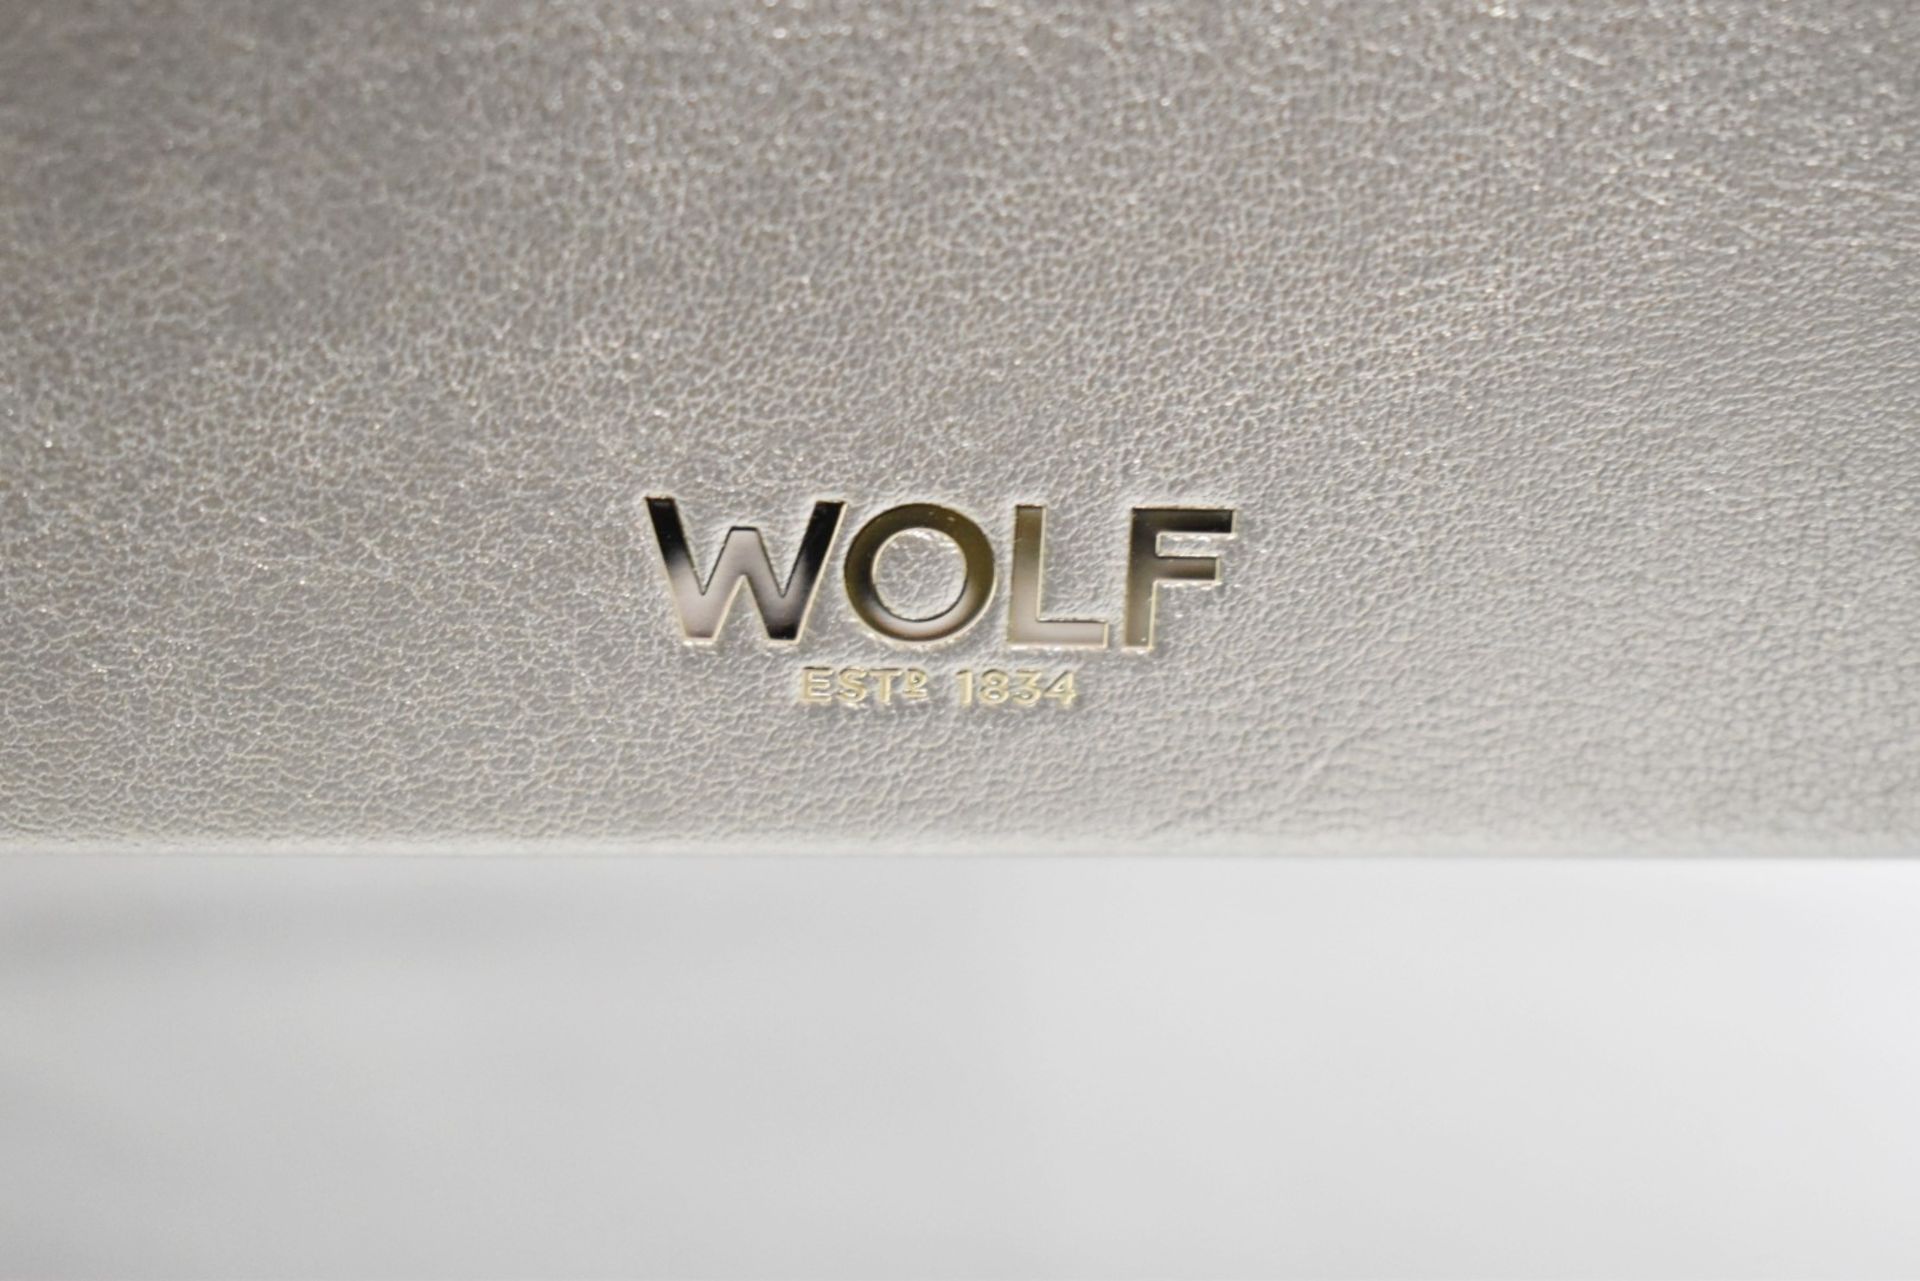 1 x WOLF 'Palermo' Large Luxury Leather Jewellery Box, With A Pewter Finish - Original Price £475.00 - Image 10 of 18